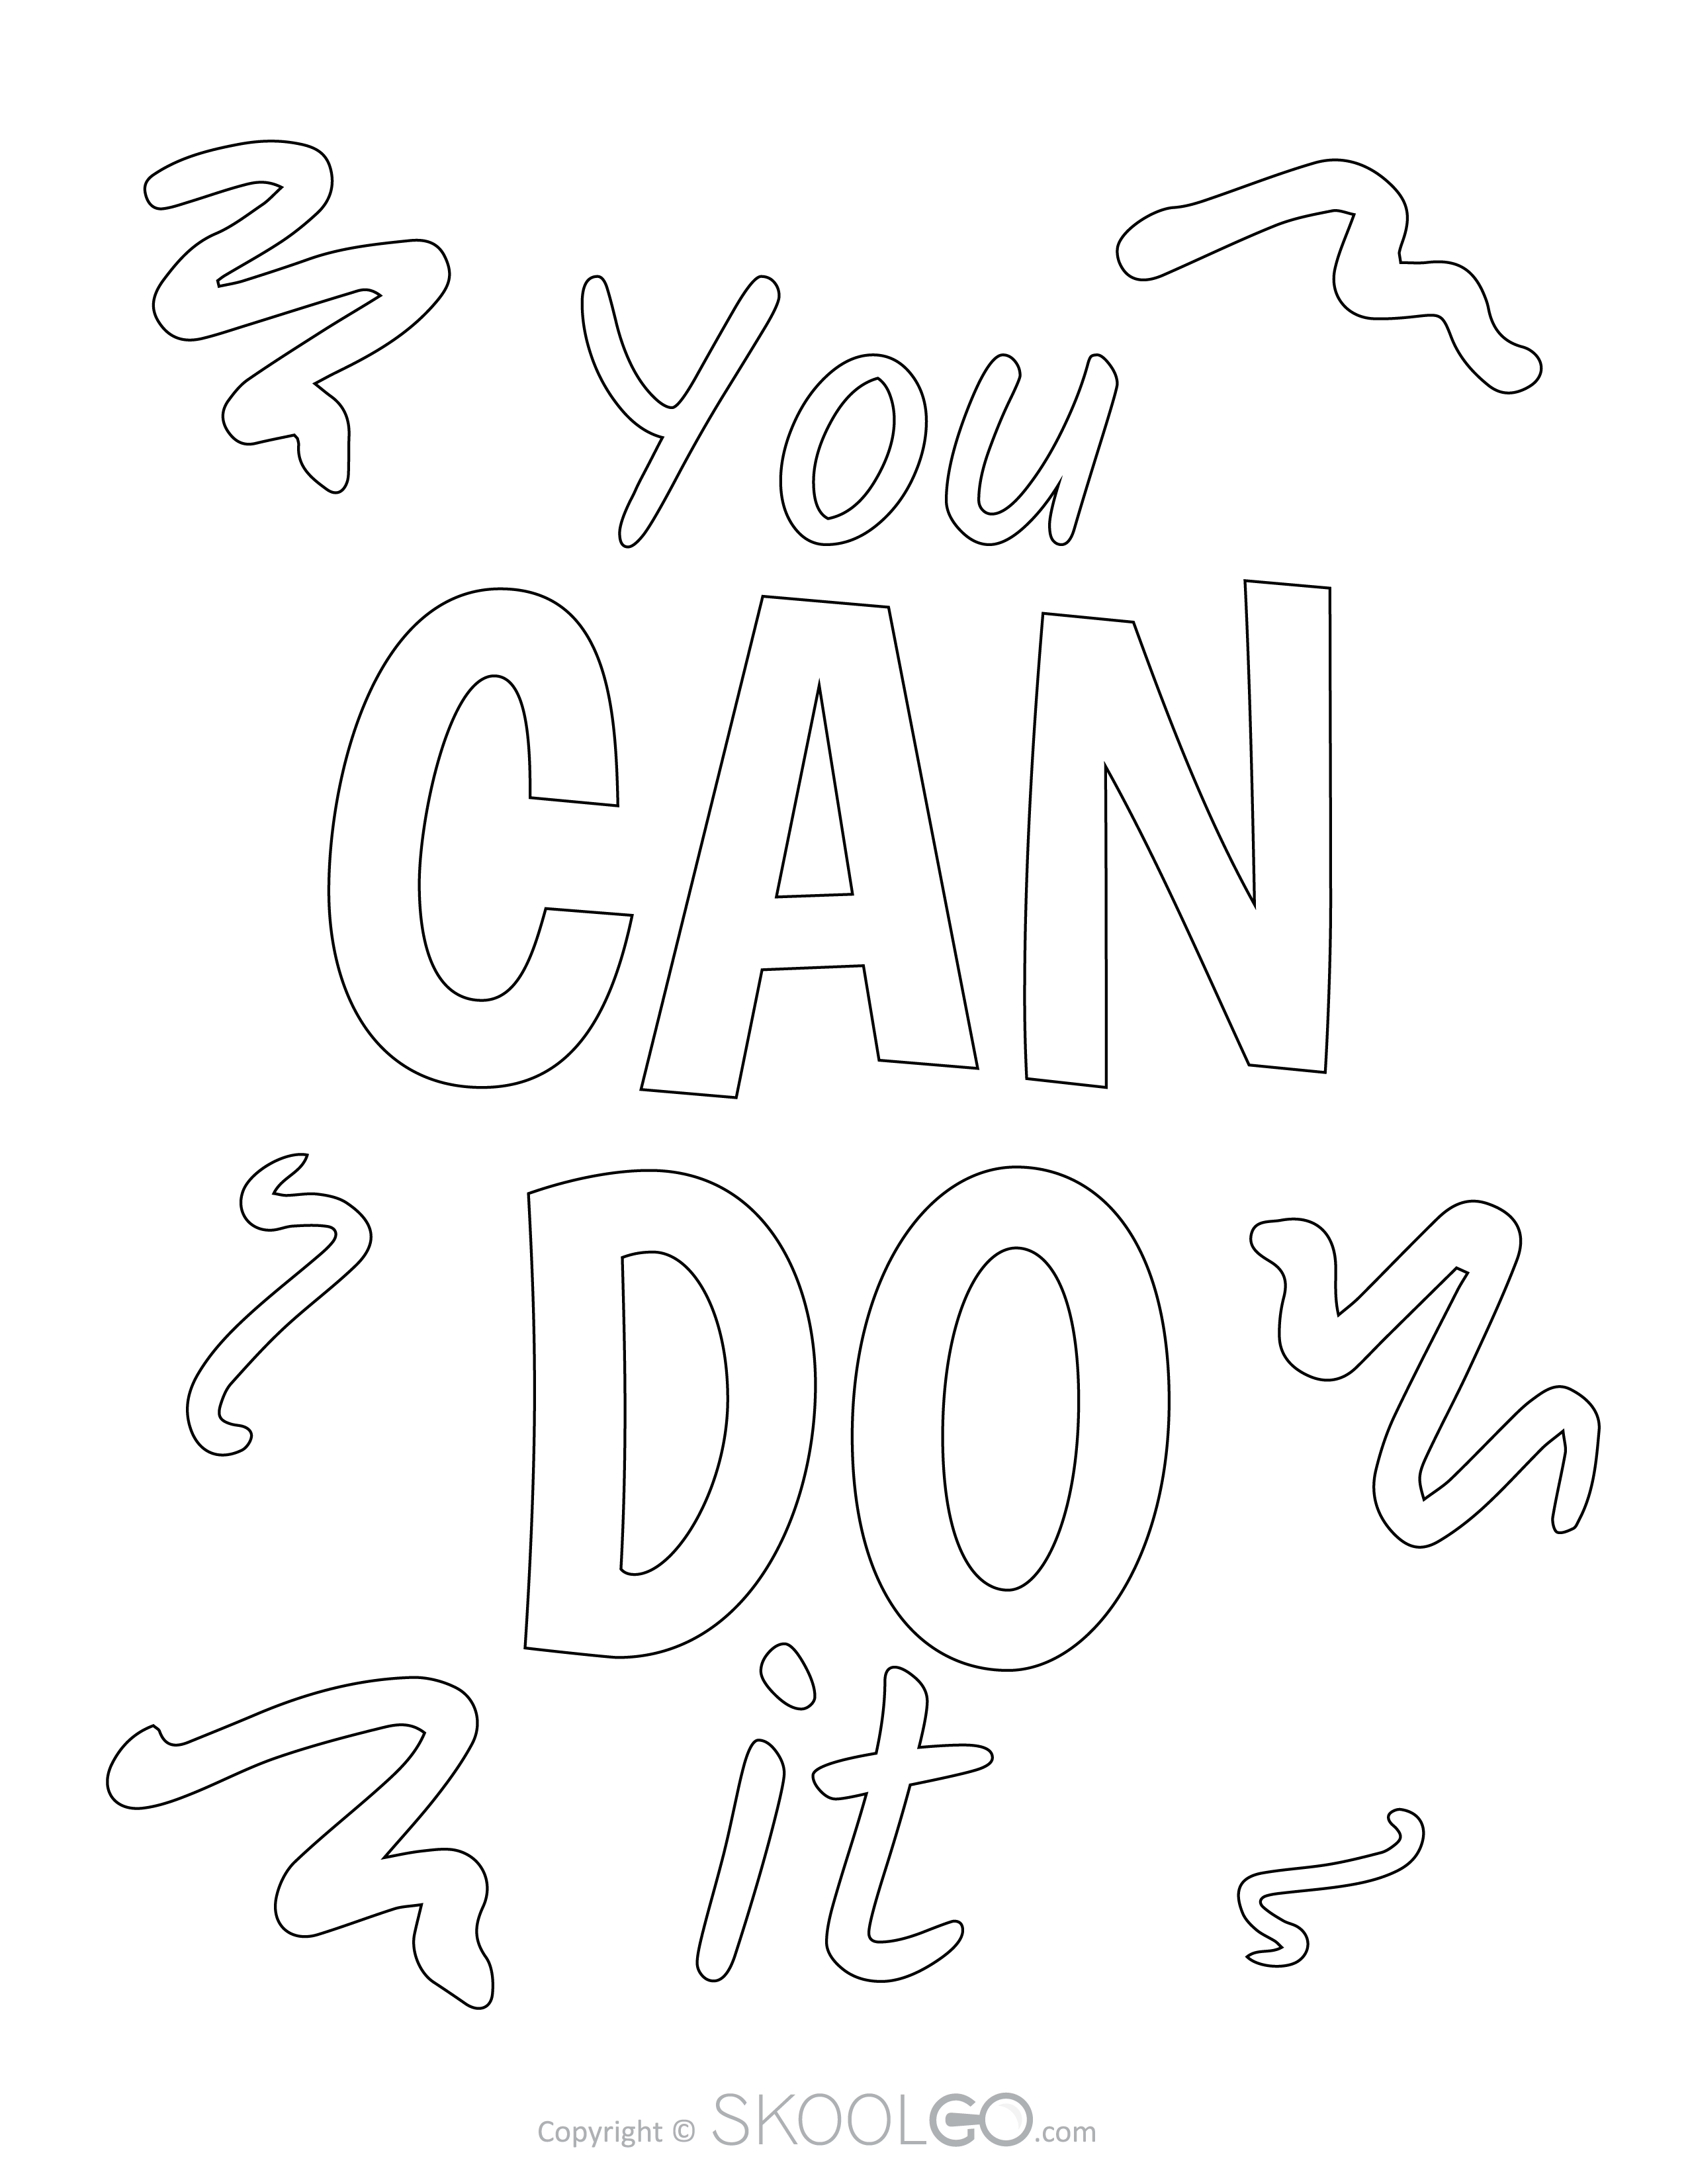 You Can Do It - Free Coloring Version Poster